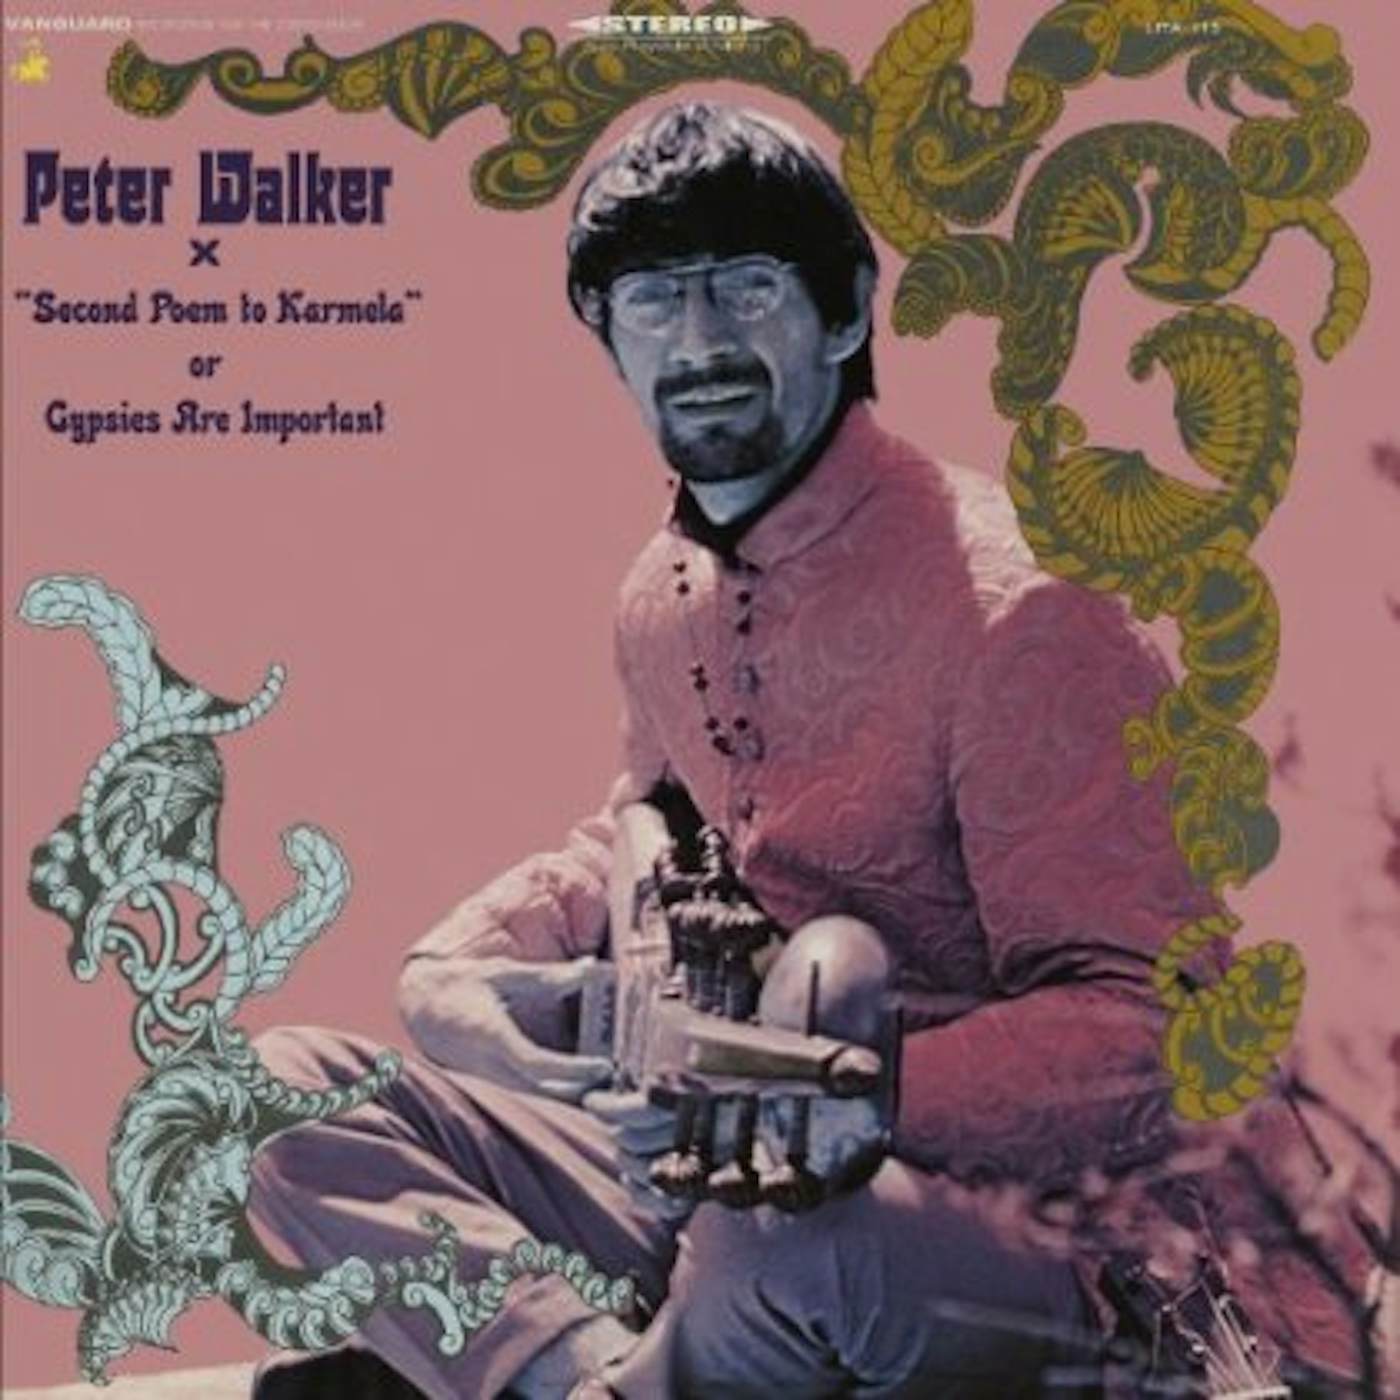 Peter Walker SECOND POEM TO KARMELA GYPSIES ARE ARE IMPORTANT Vinyl Record